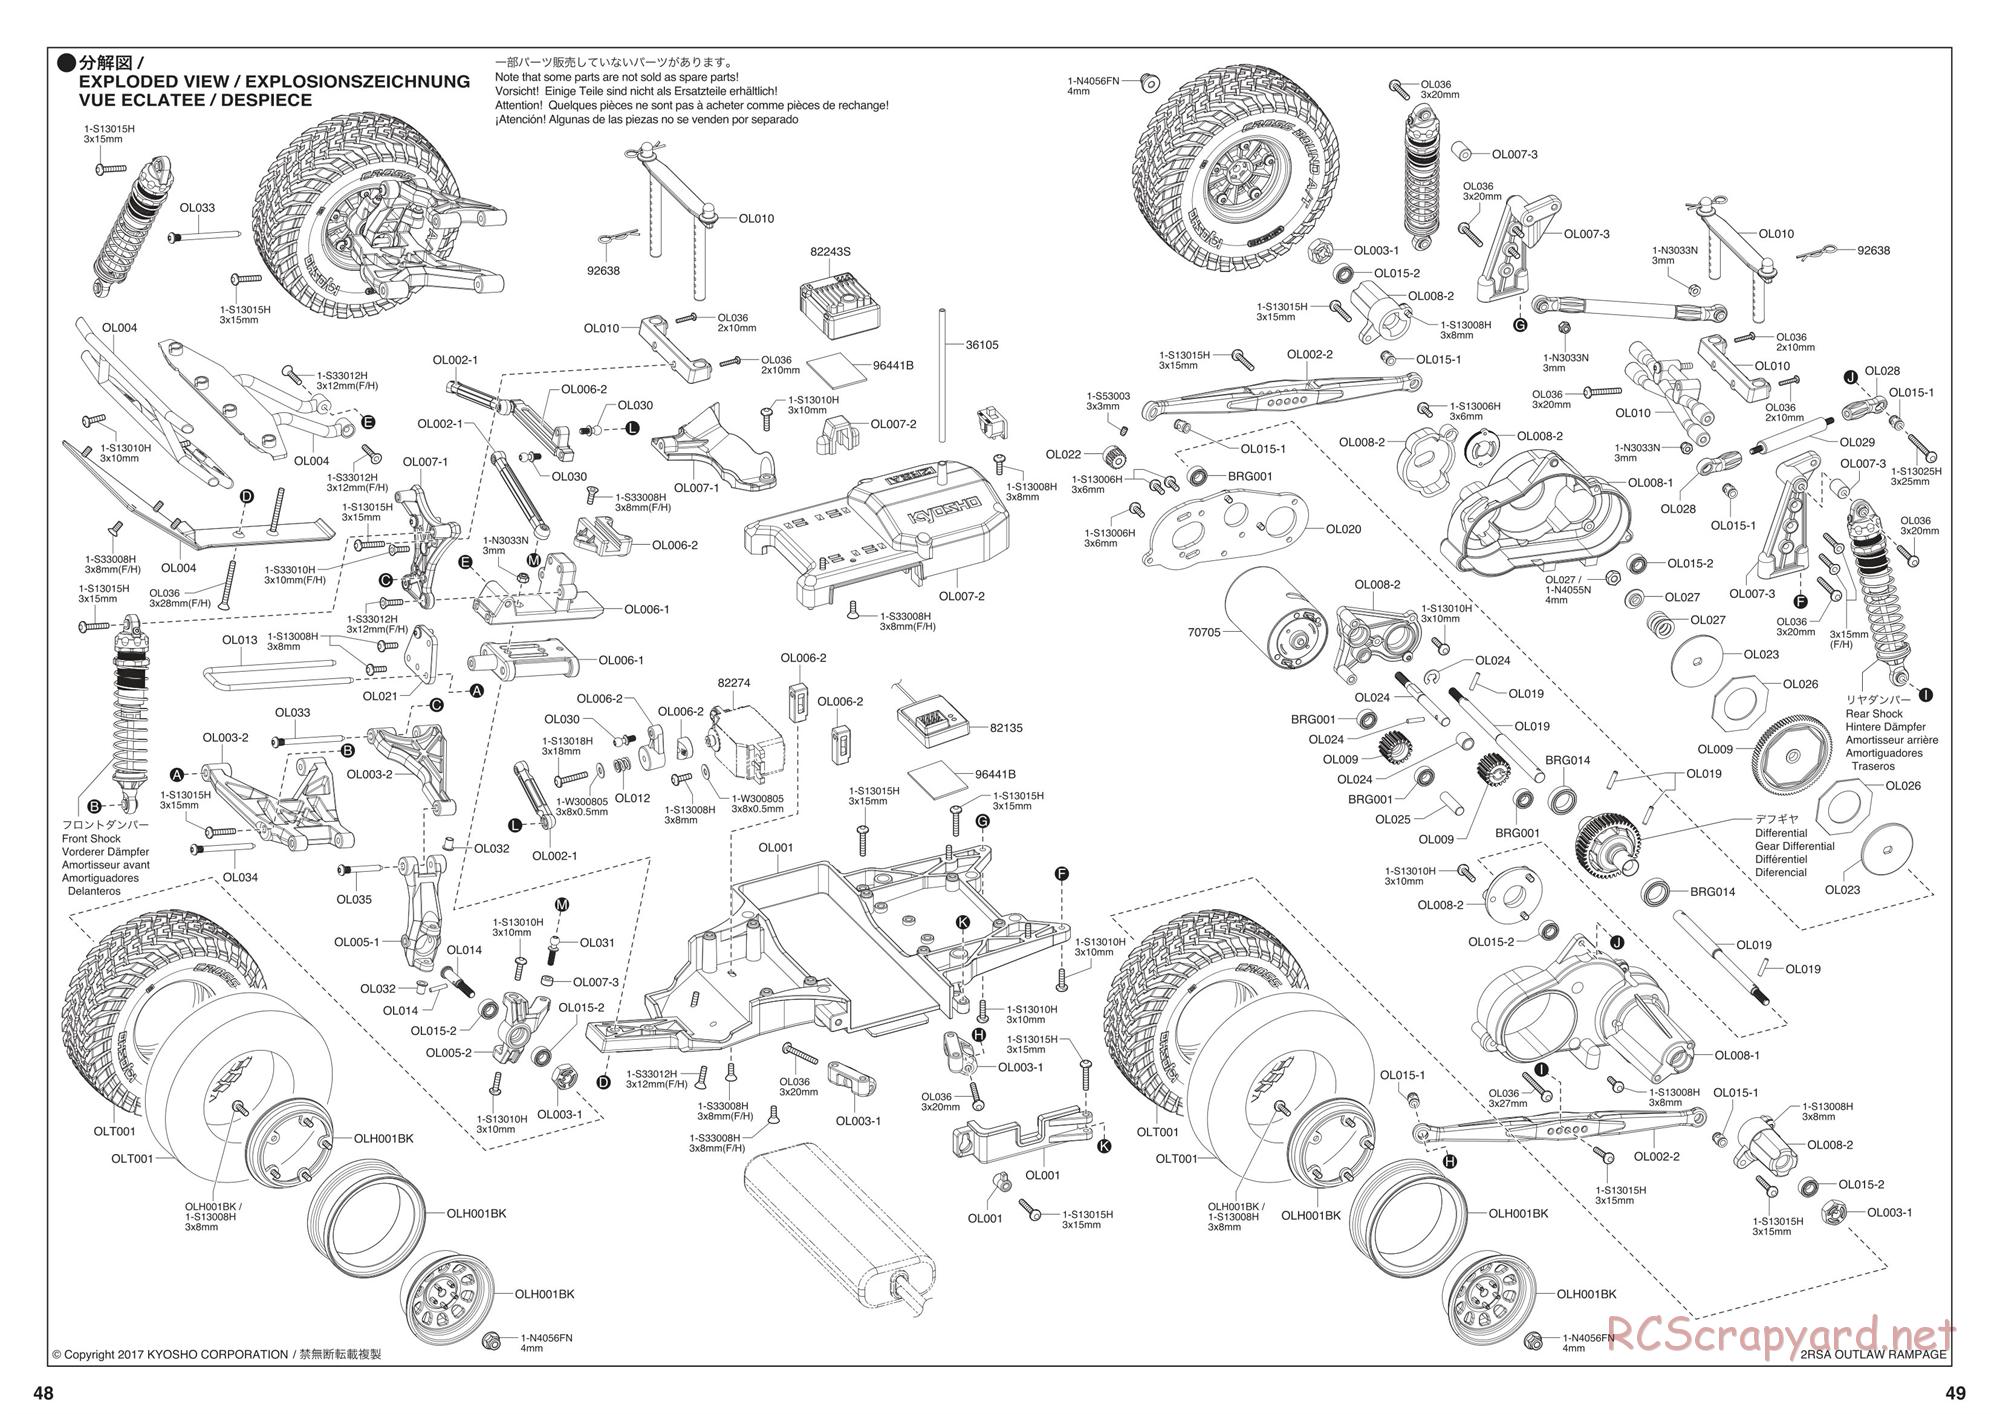 Kyosho - Outlaw Rampage - Exploded Views - Page 1